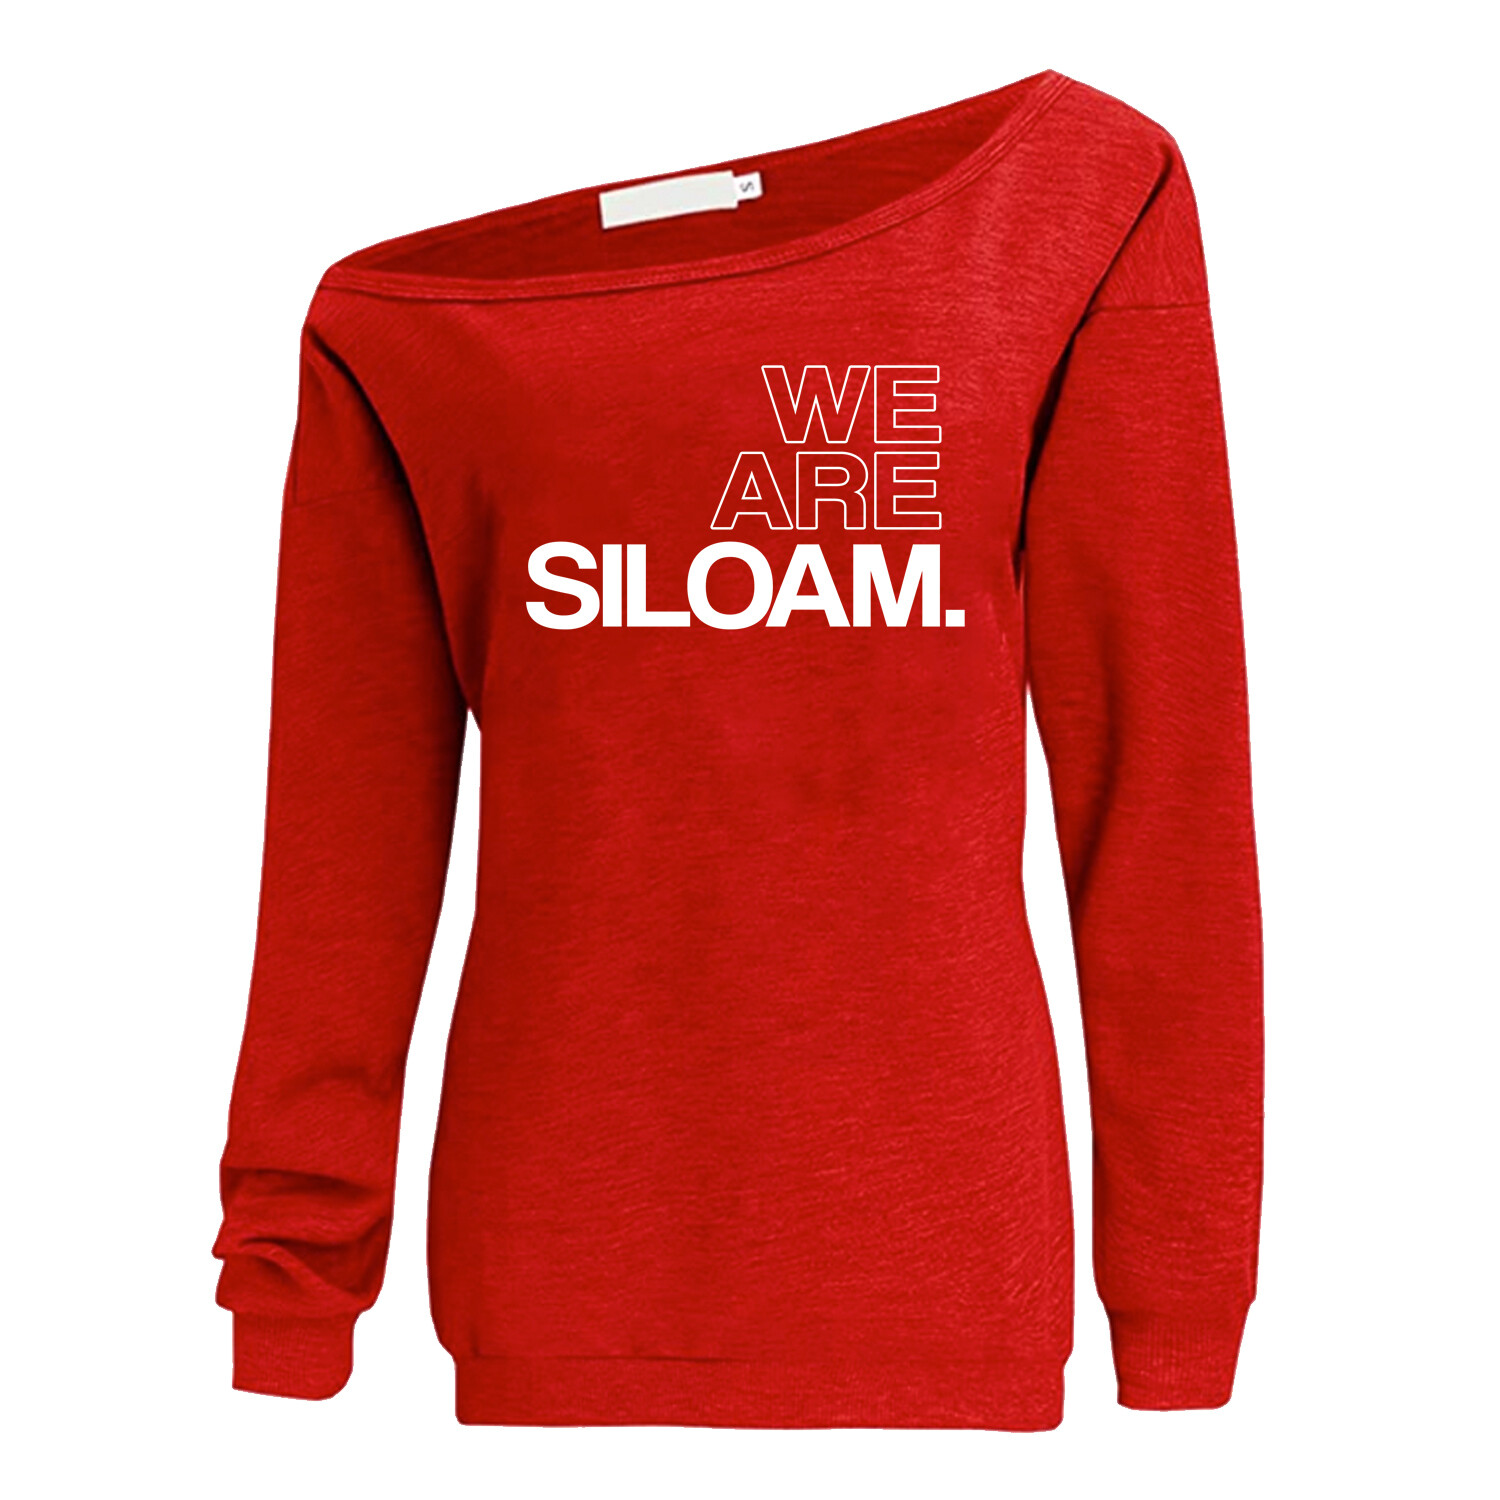 We Are Siloam Off the Shoulder Sweatshirt (Red)